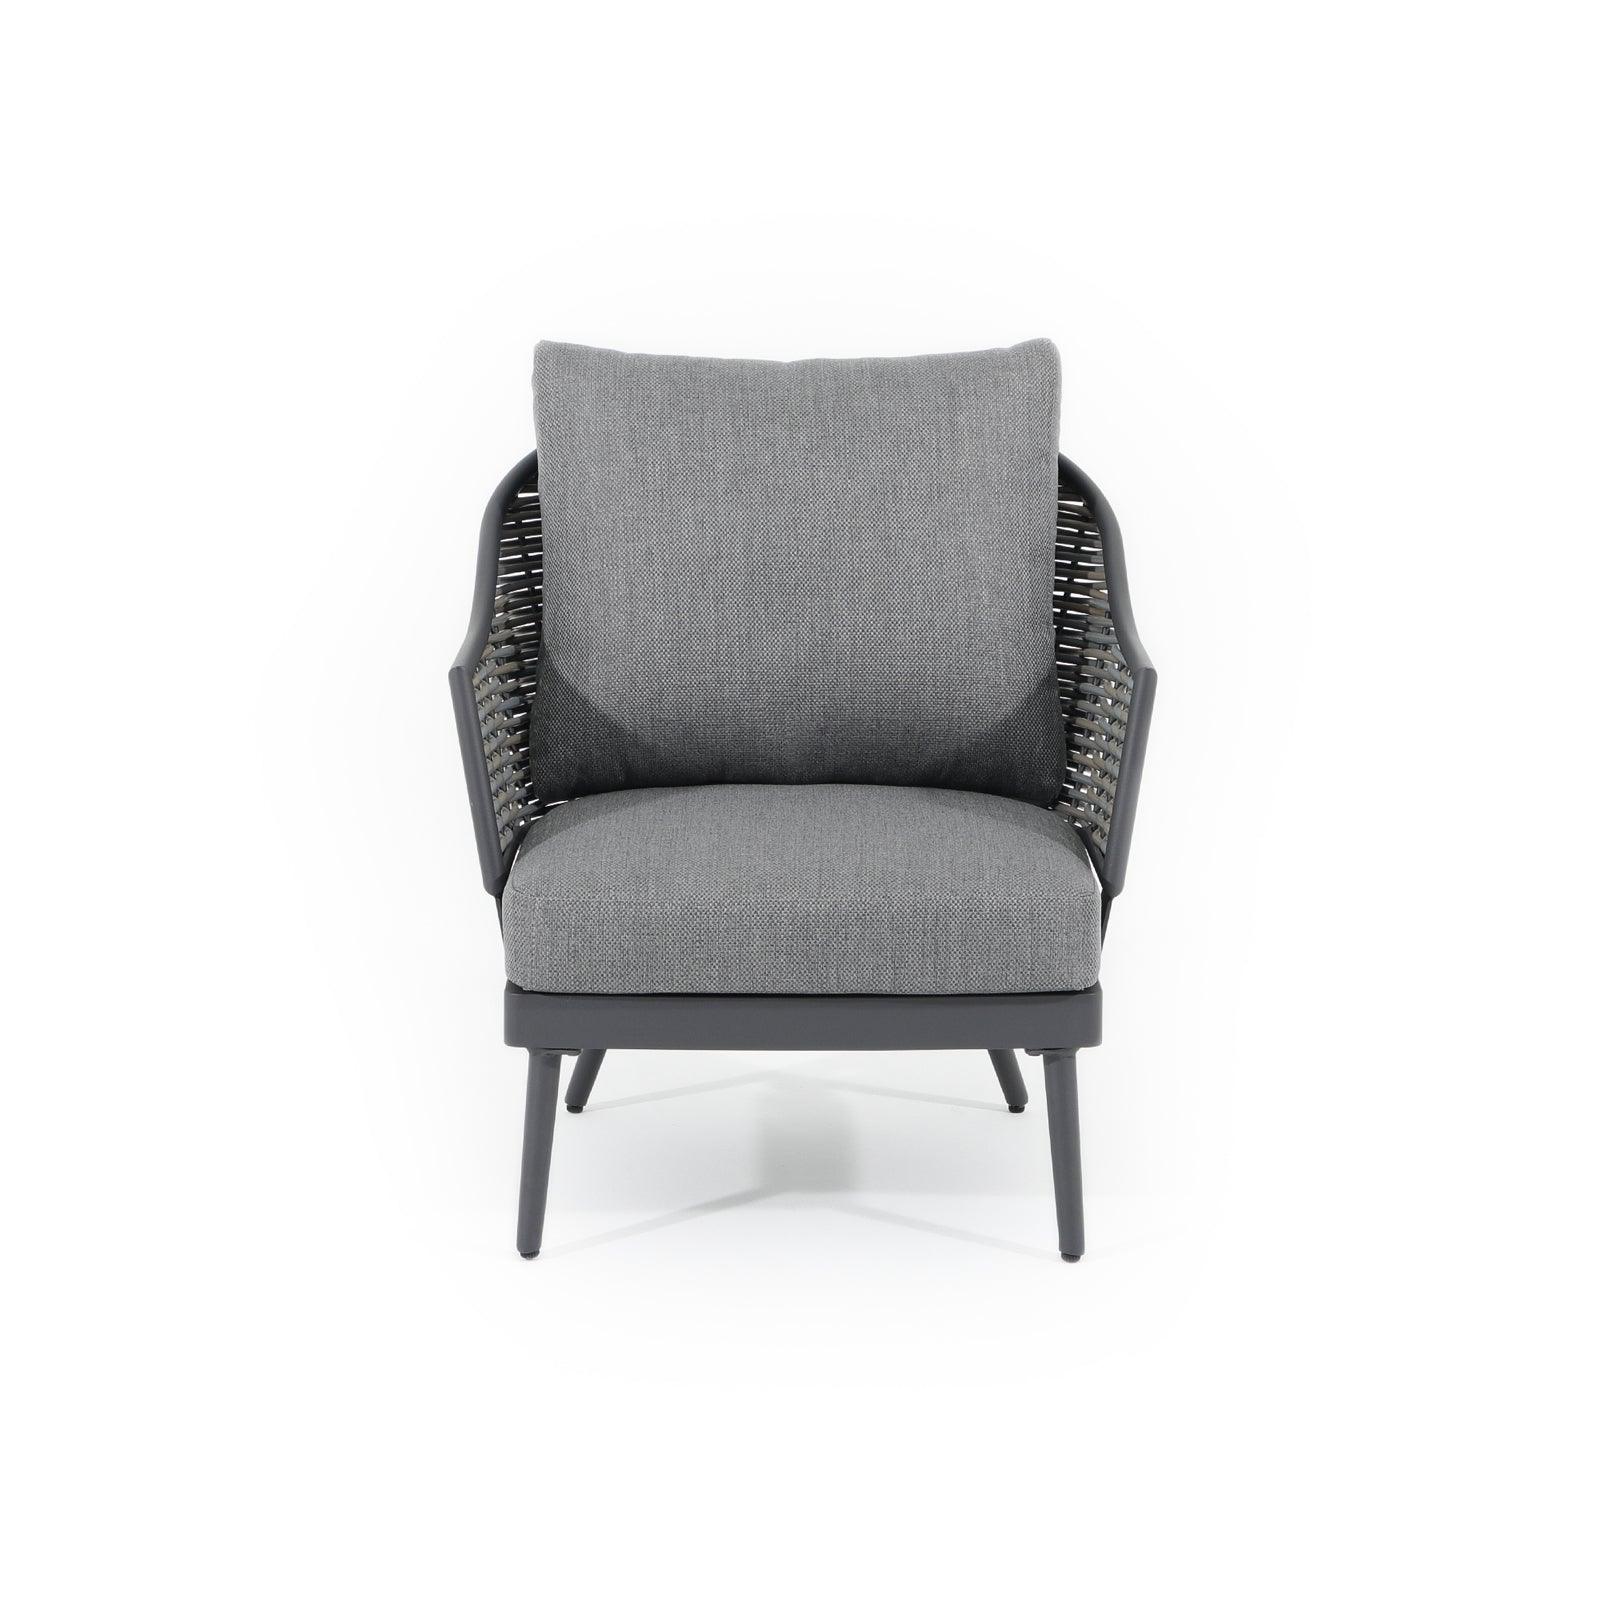 Burano Grey wicker outdoor arm chair with aluminum frame, grey cushions, 1 seat, front - Jardina Furniture